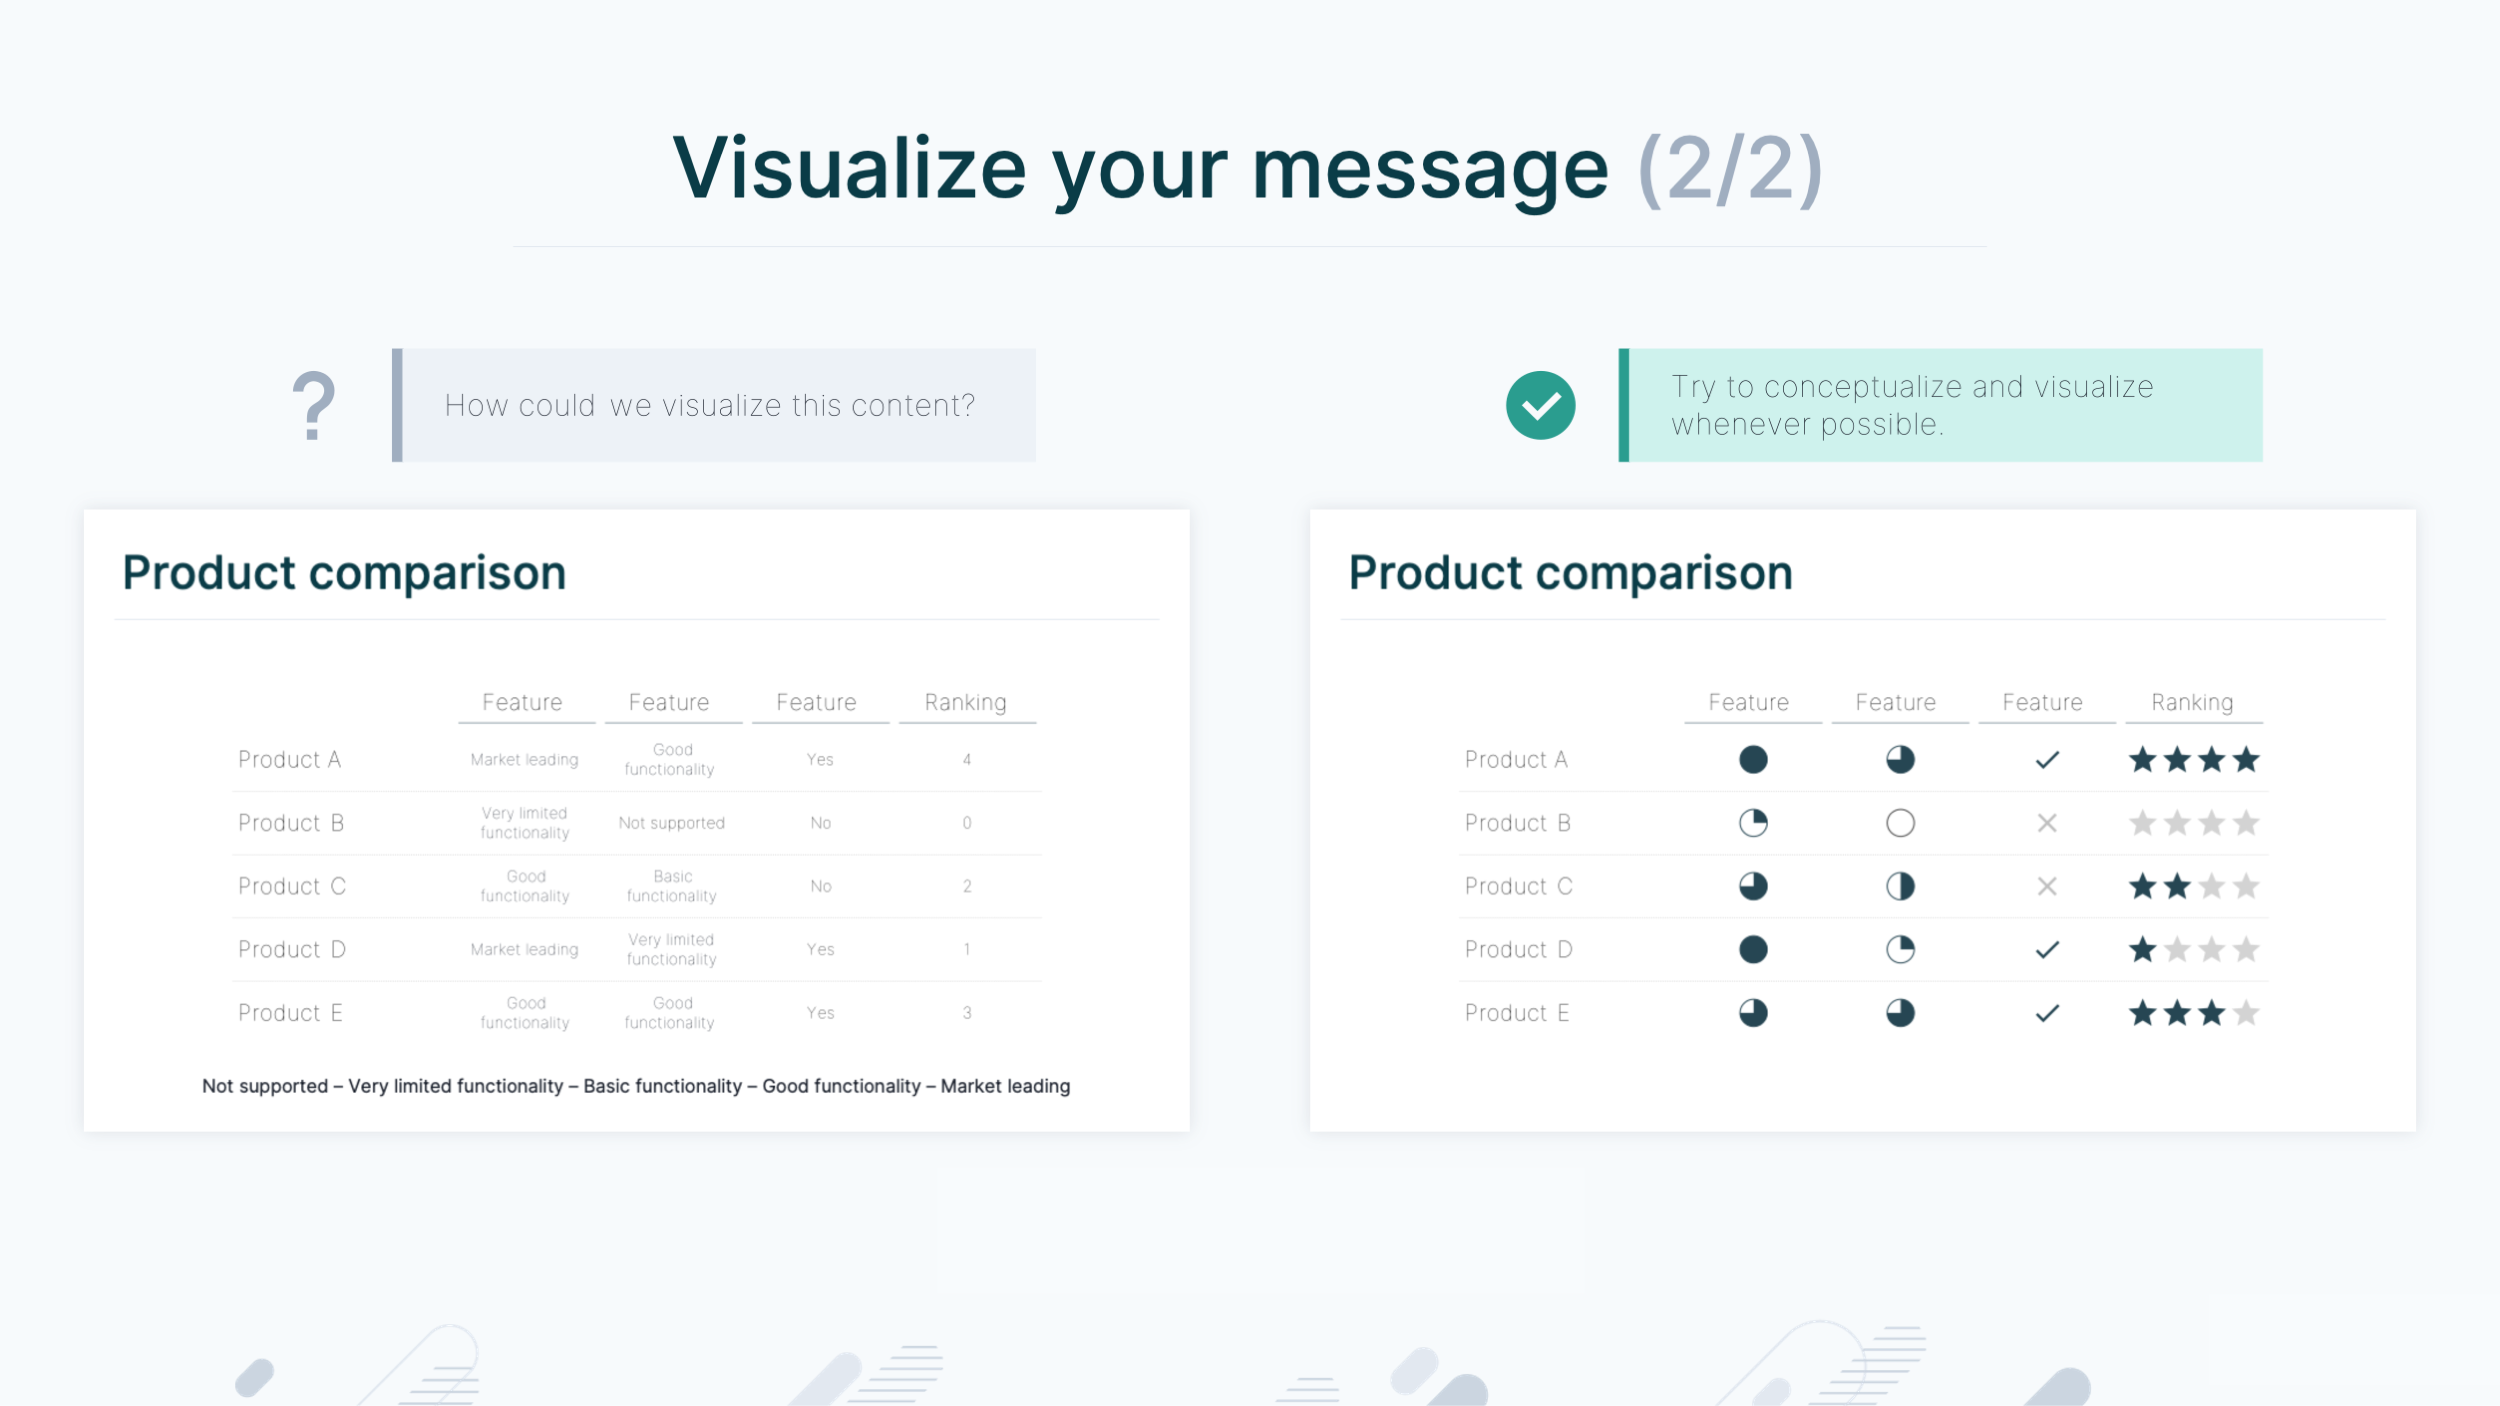 Visualize message 2